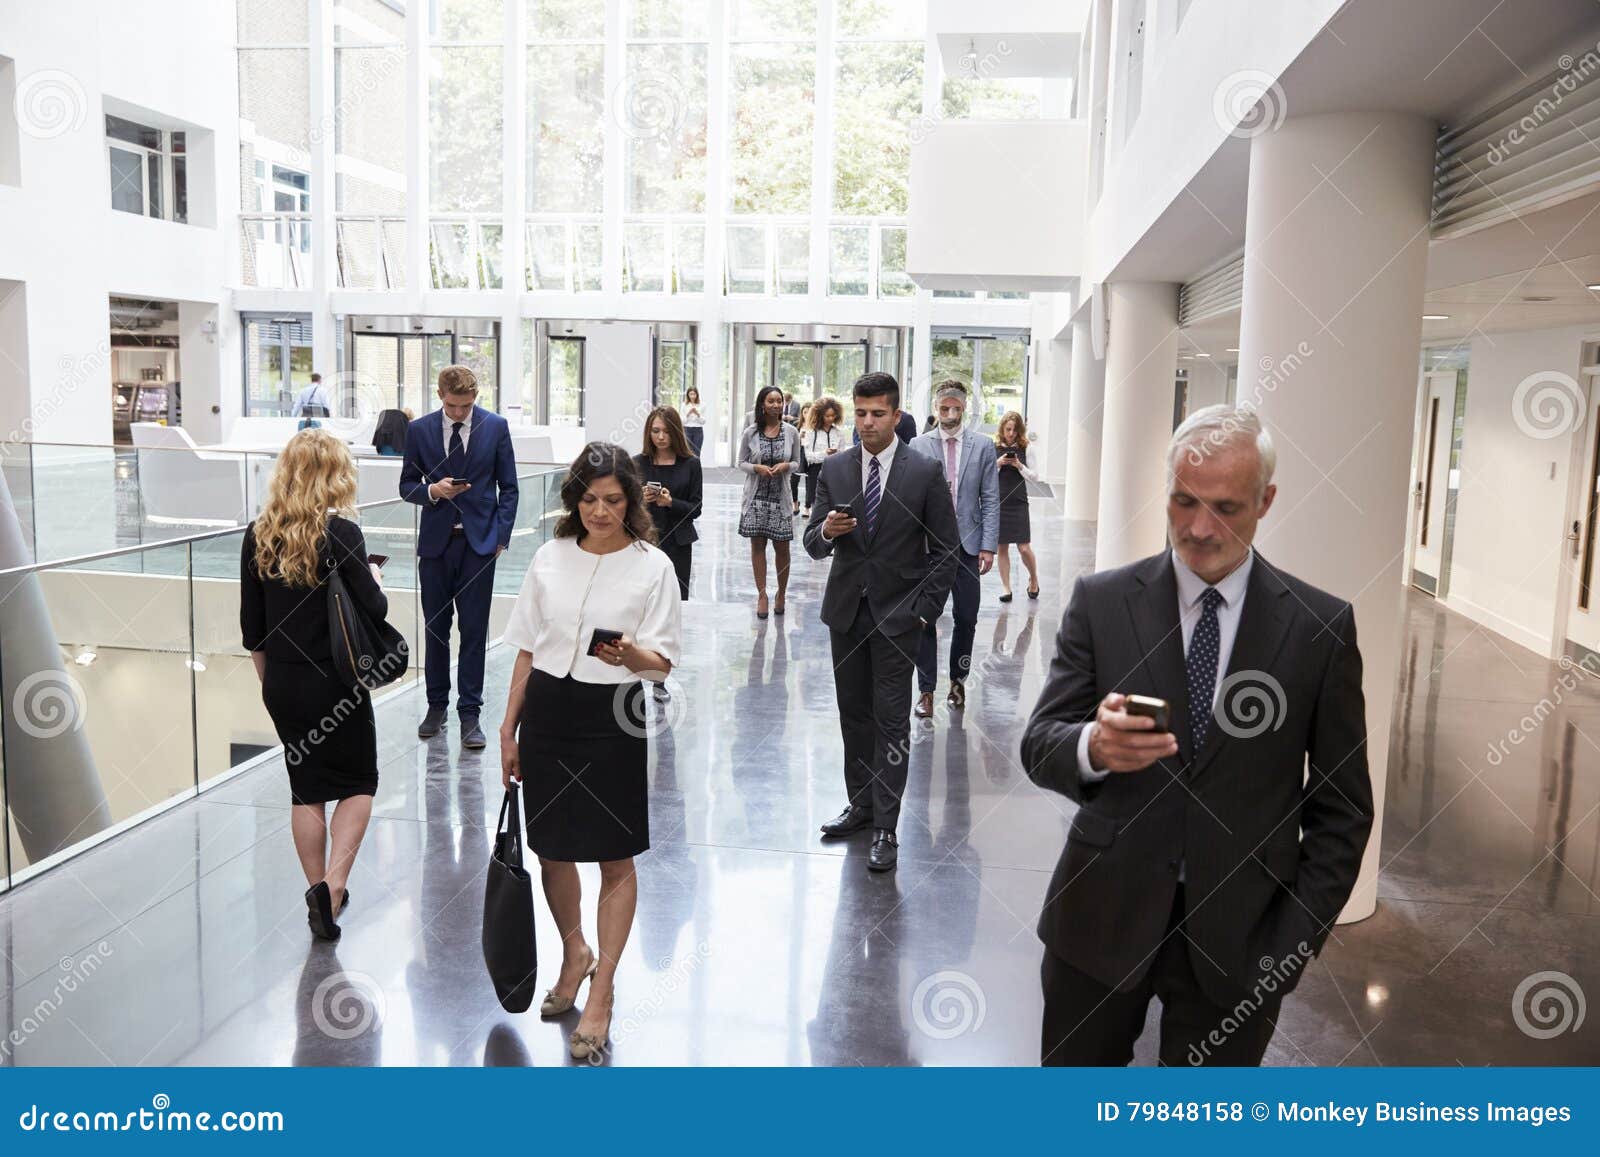 businesspeople using technology in busy lobby area of office